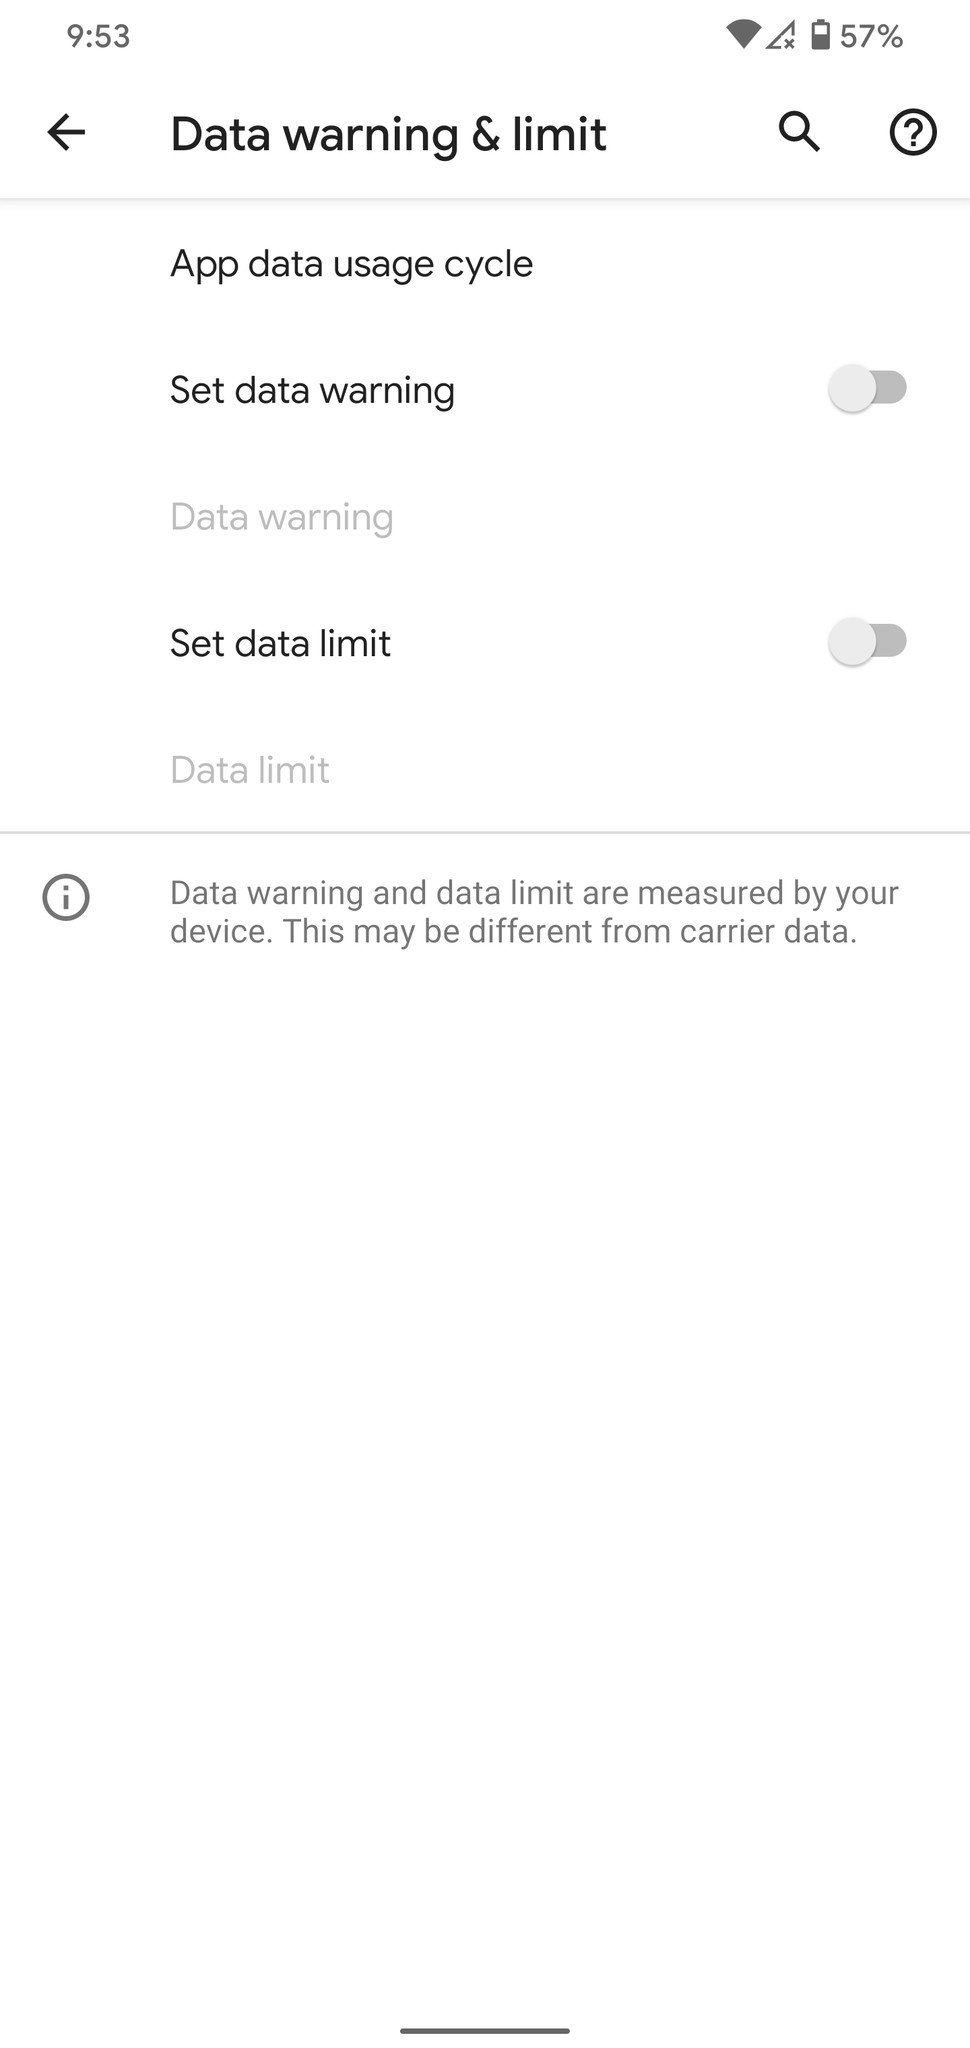 How To Use Less Mobile Data On Your Android Phone